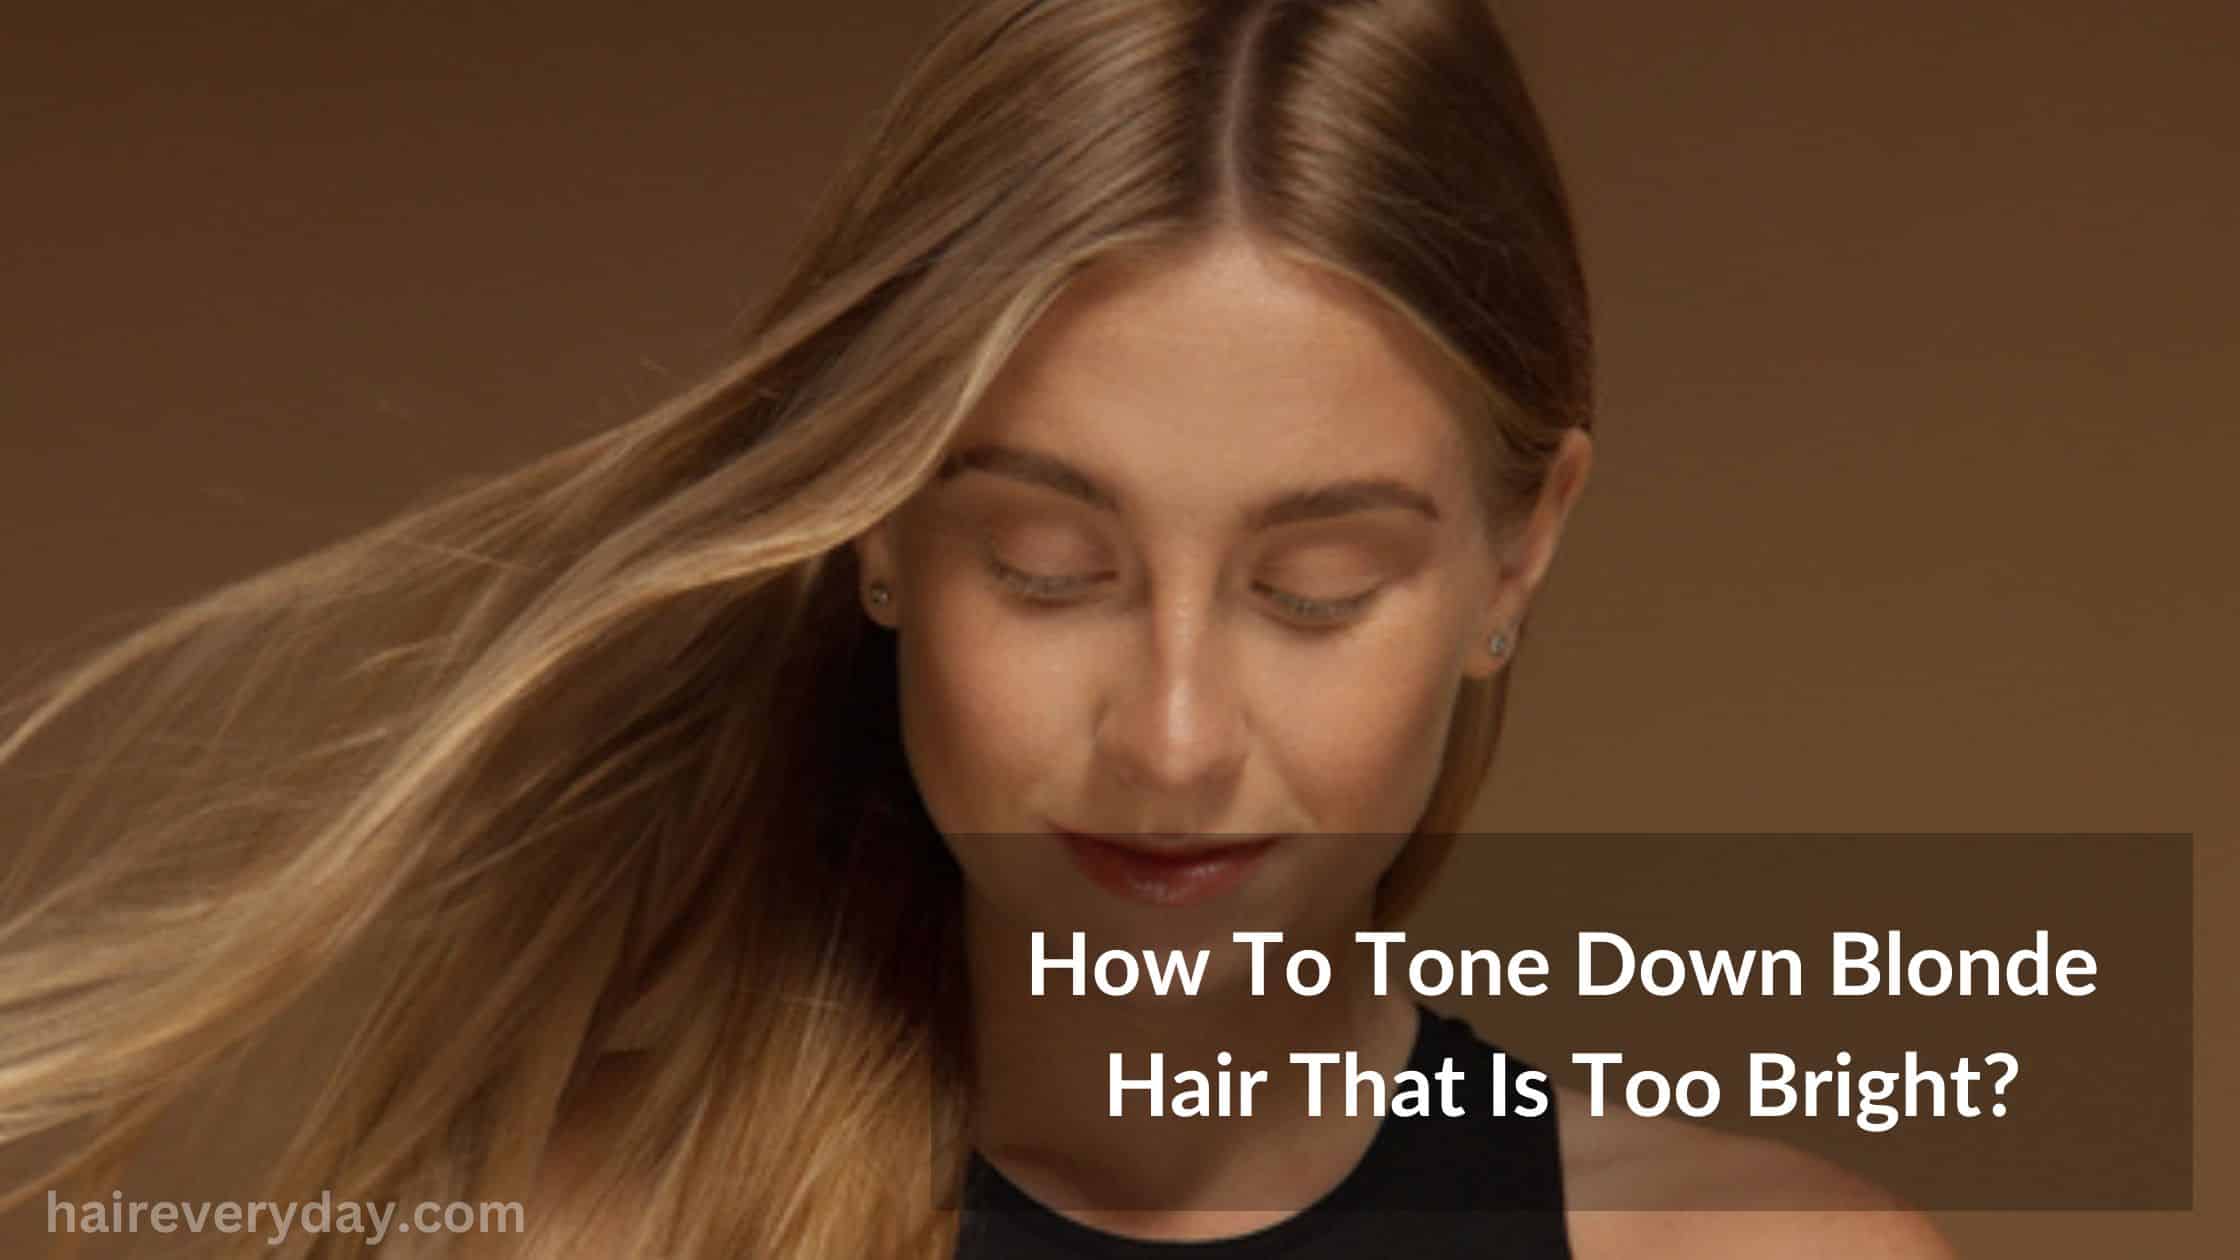 How To Tone Down Blonde Hair That Is Too Bright? - Hair Everyday Review